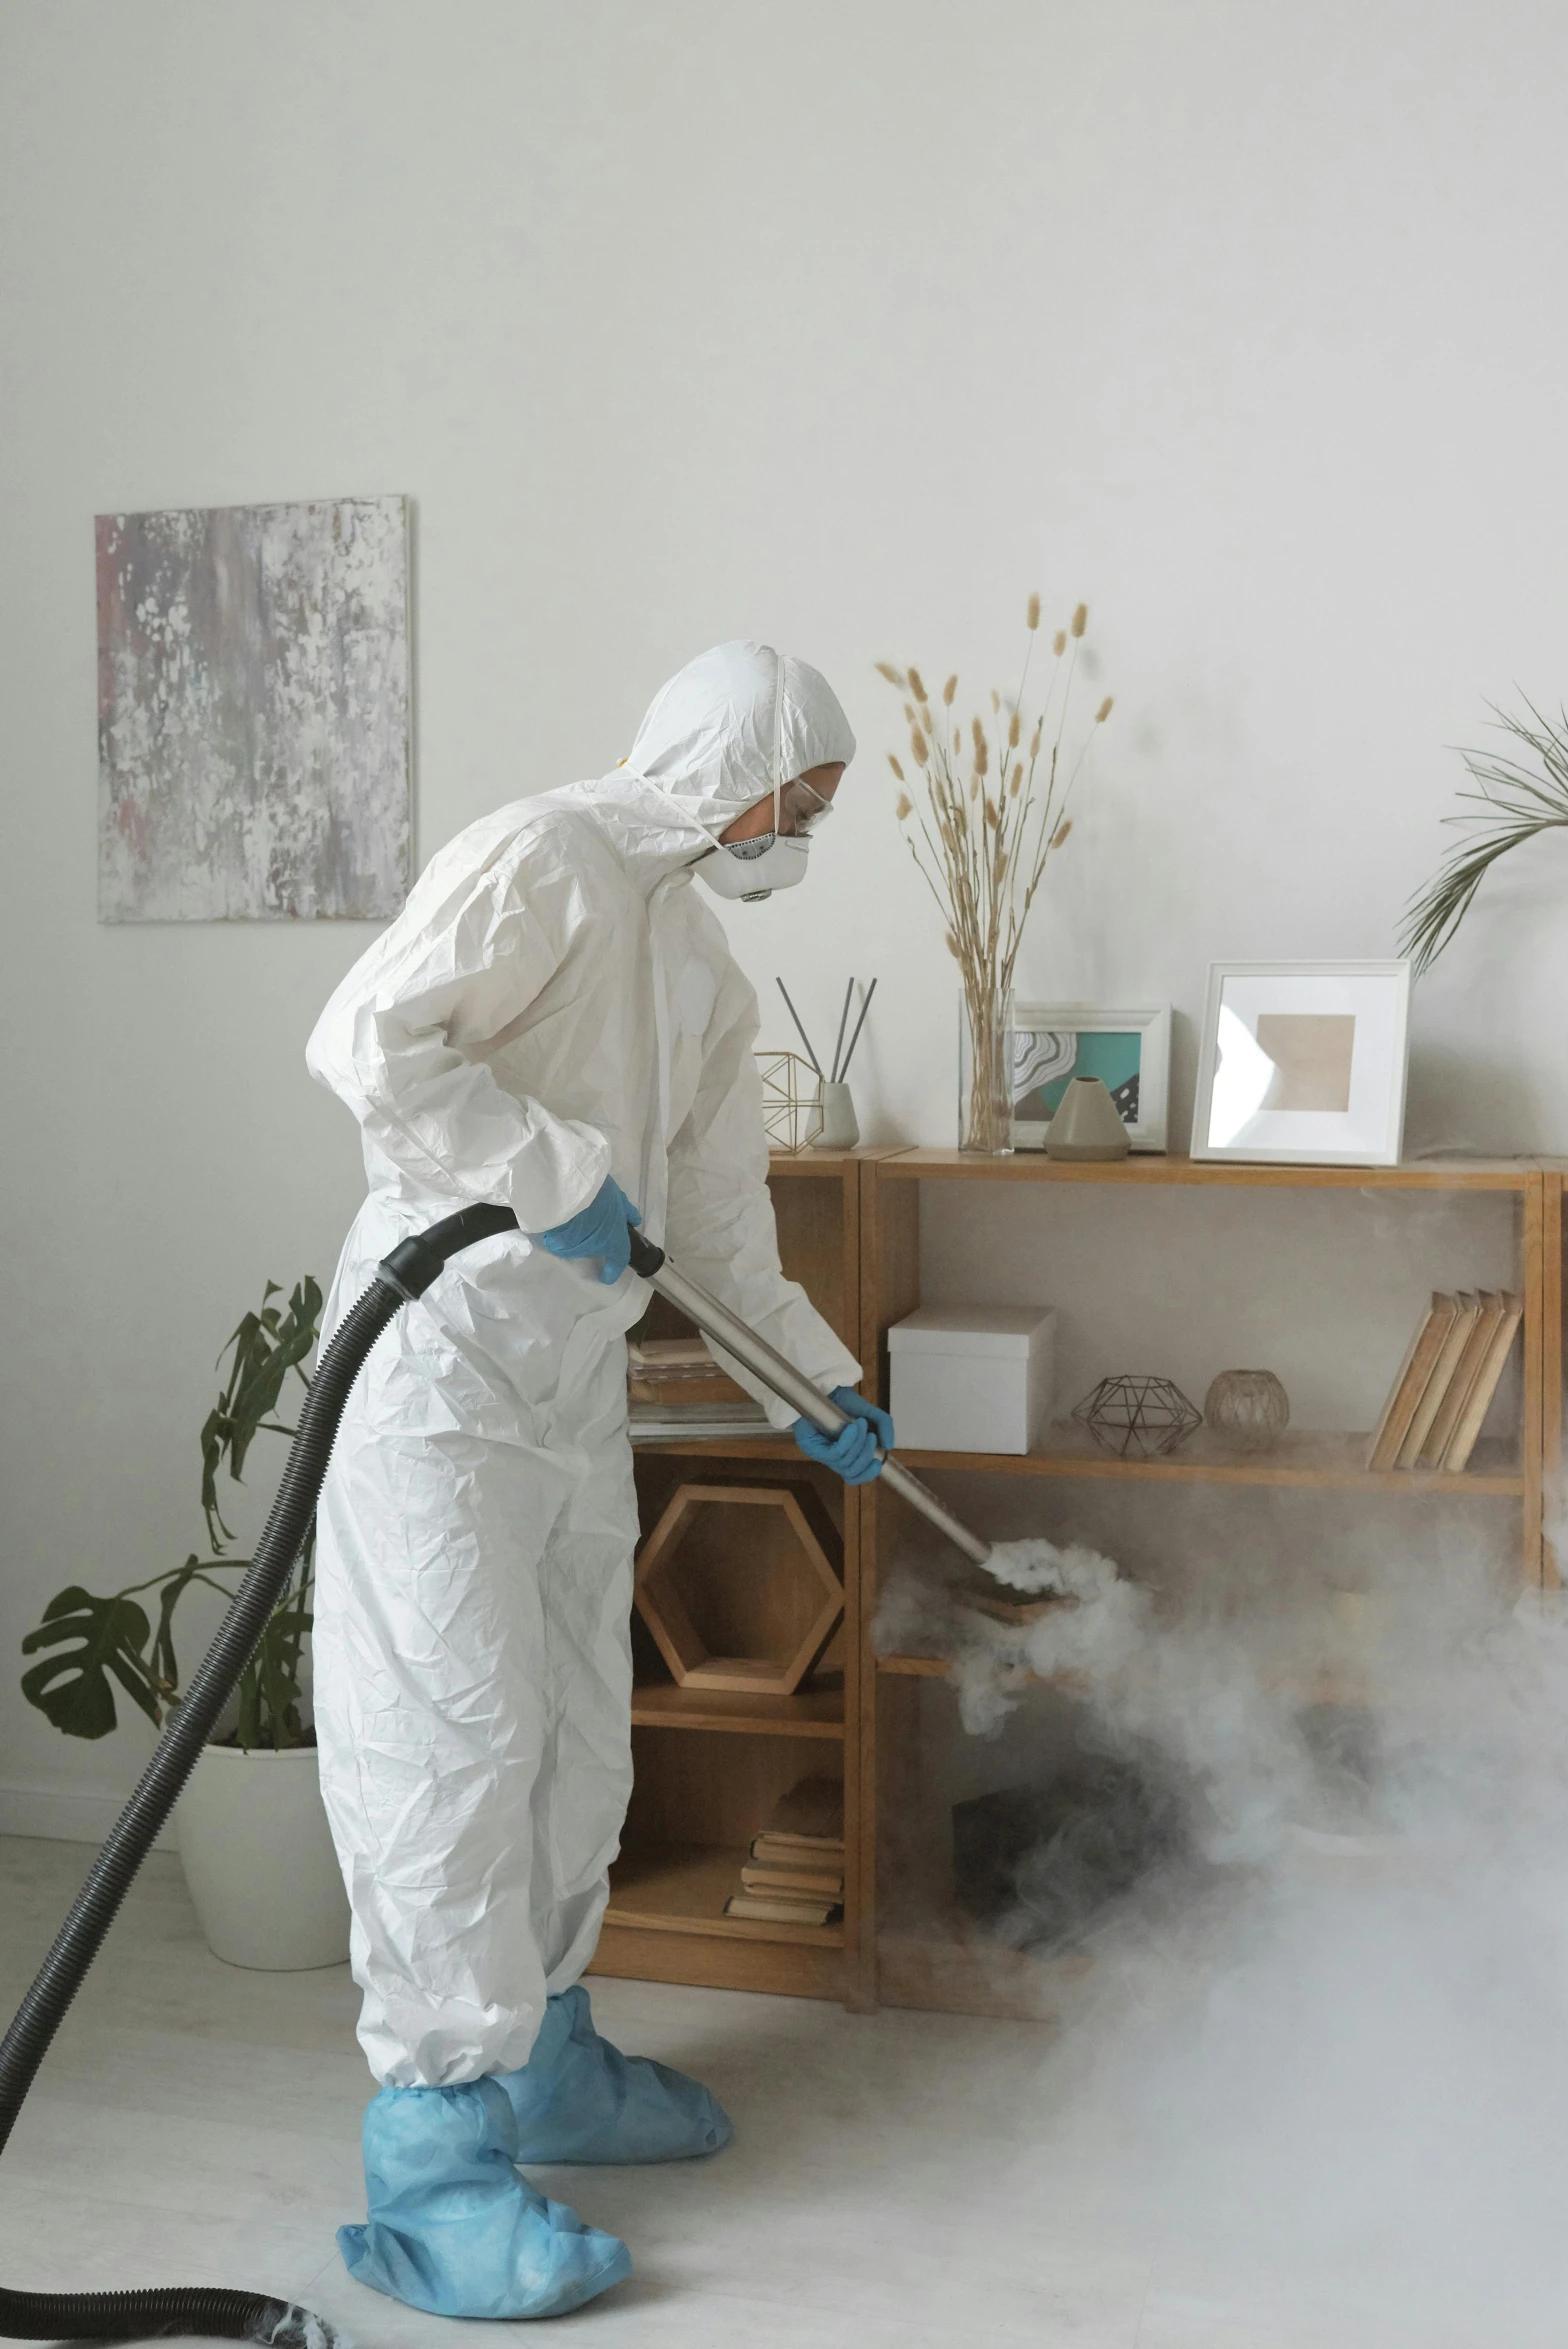 a person in a white suit is cleaning a room, dust in the air, wearing a robe, profile image, furniture